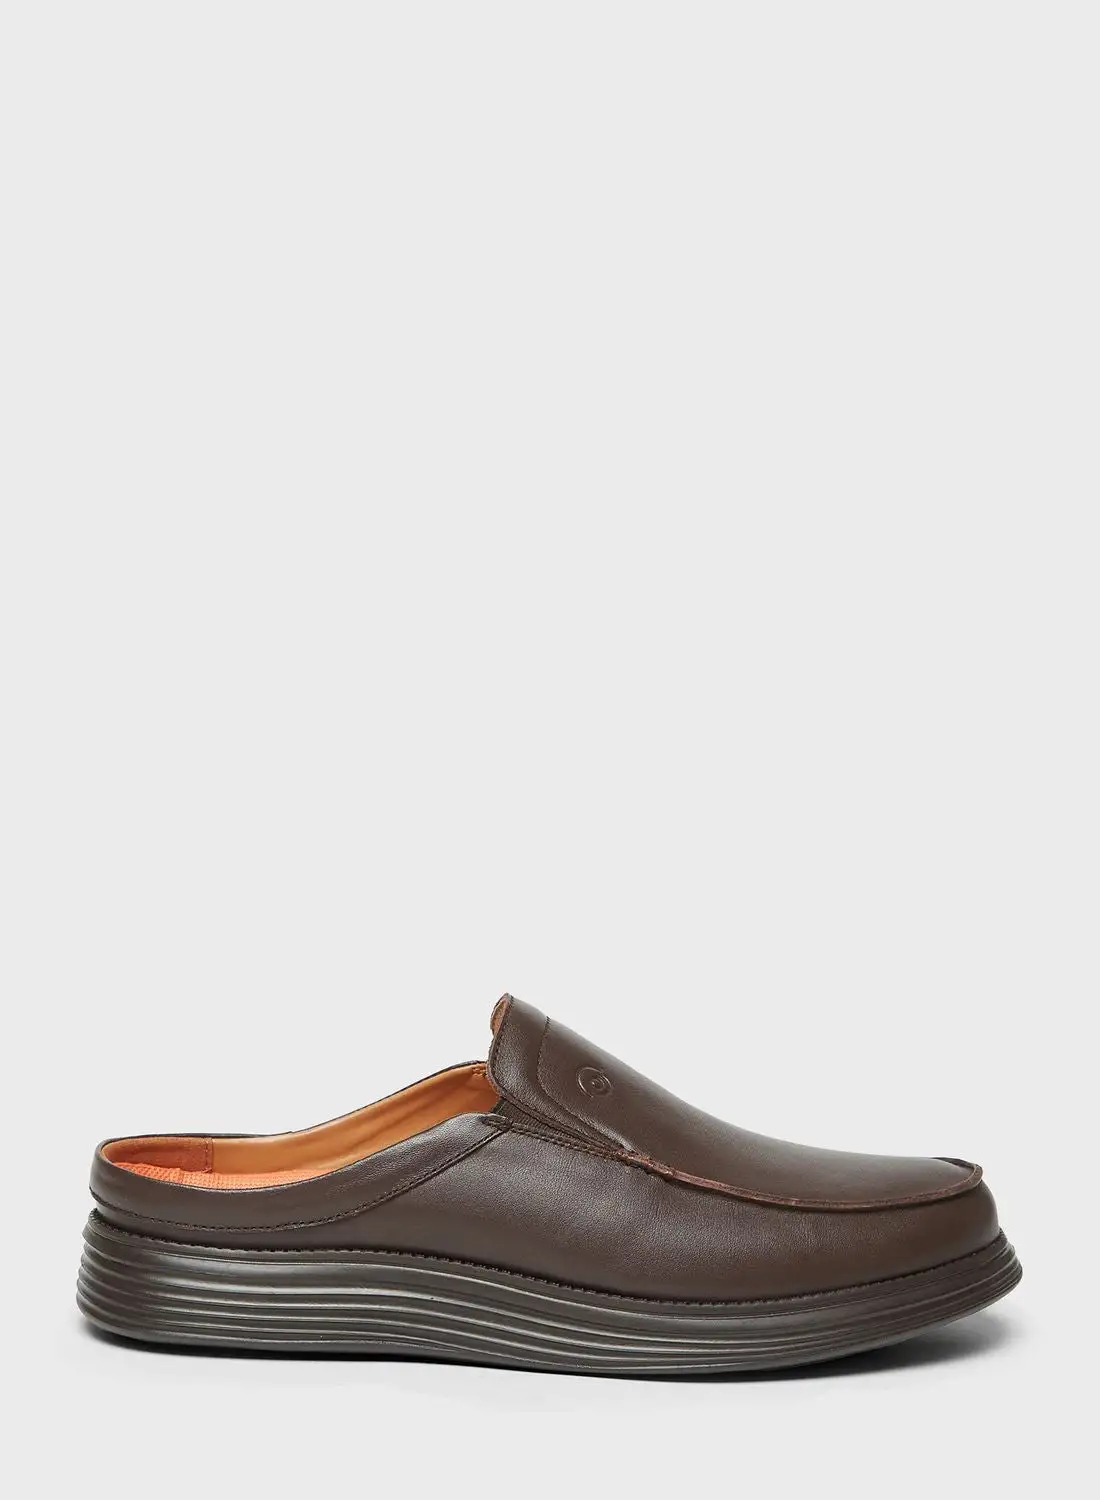 Le Confort Casual Comfort Slip Ons